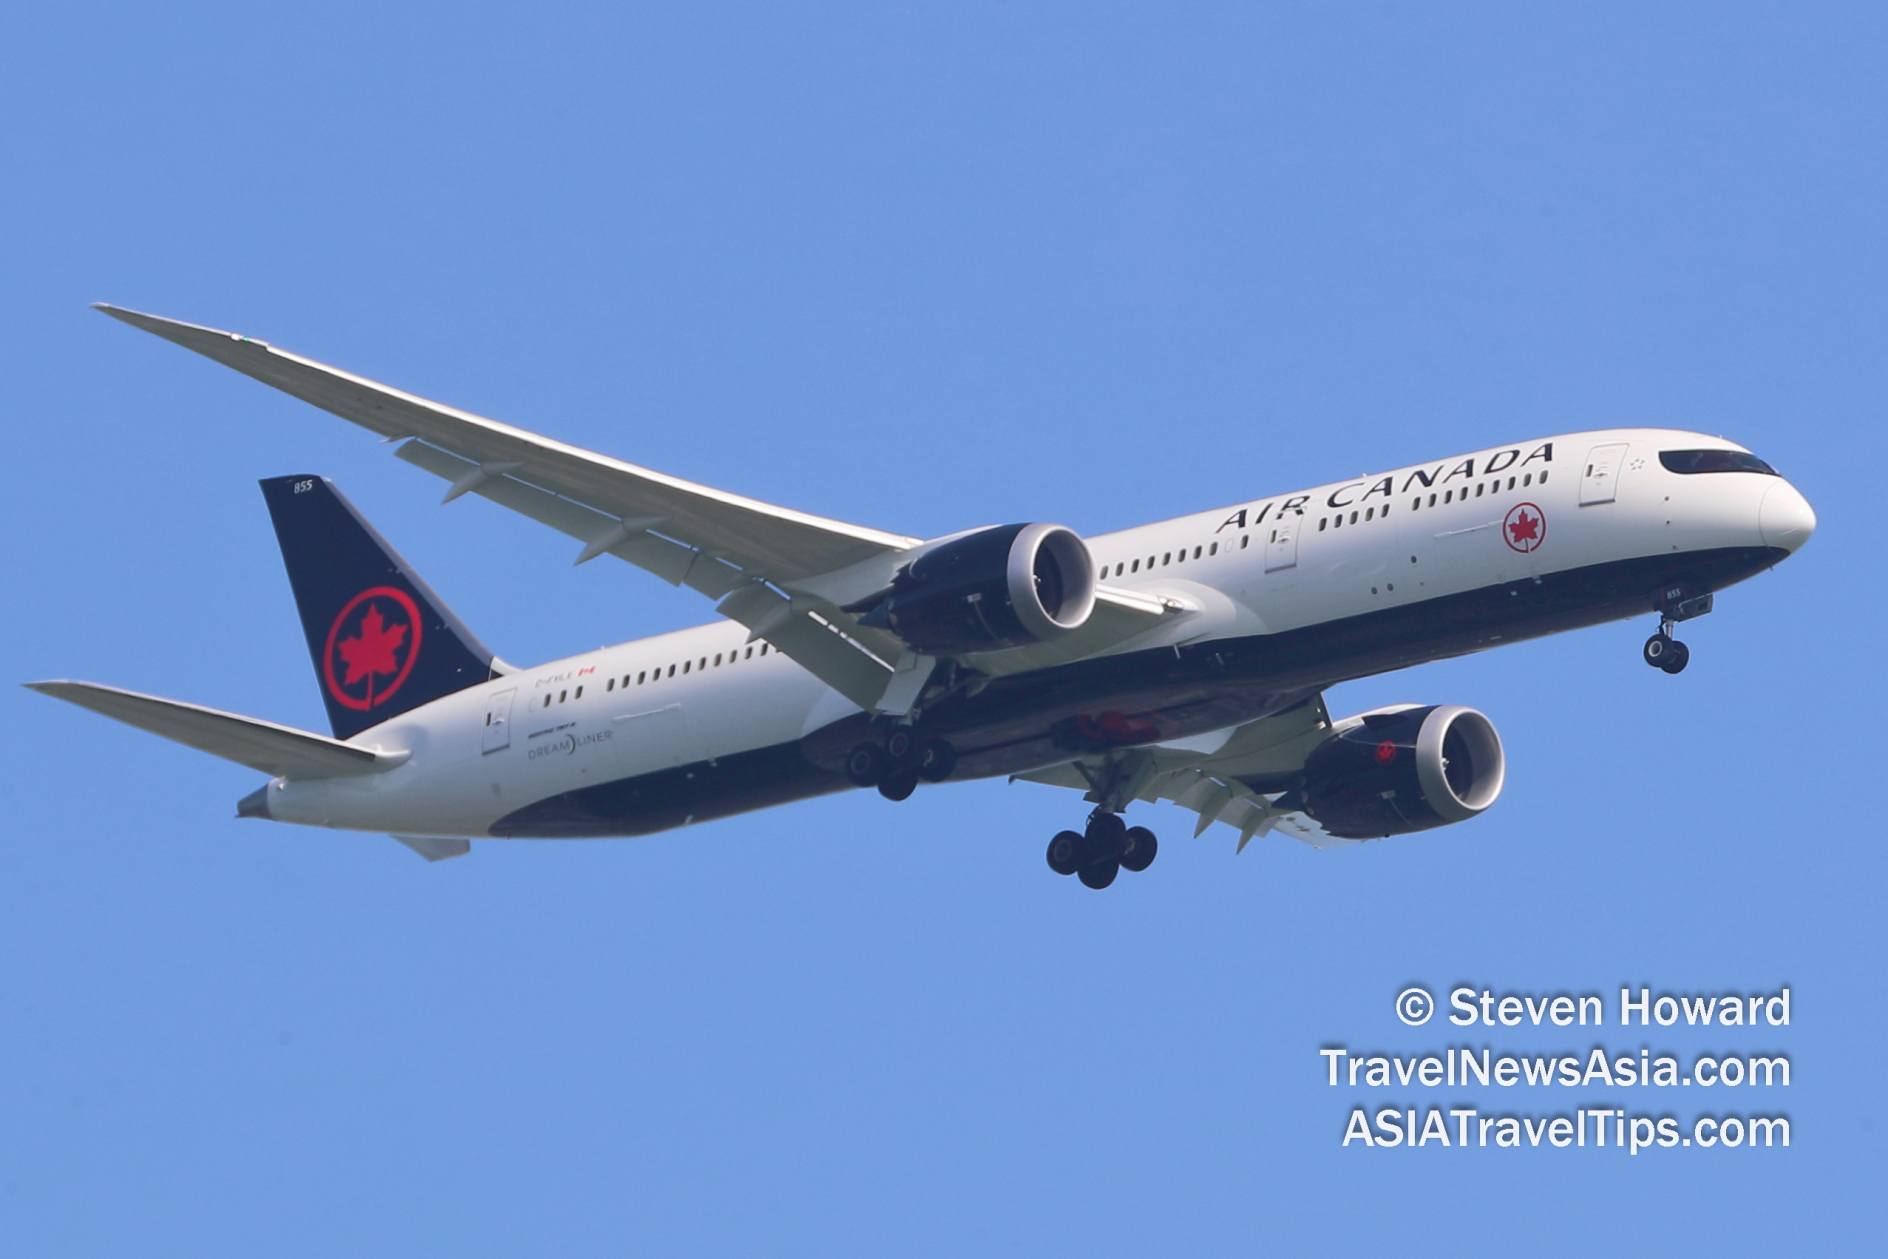 Air Canada B787-9 reg: C-FVLX. Picture by Steven Howard of TravelNewsAsia.com Click to enlarge.